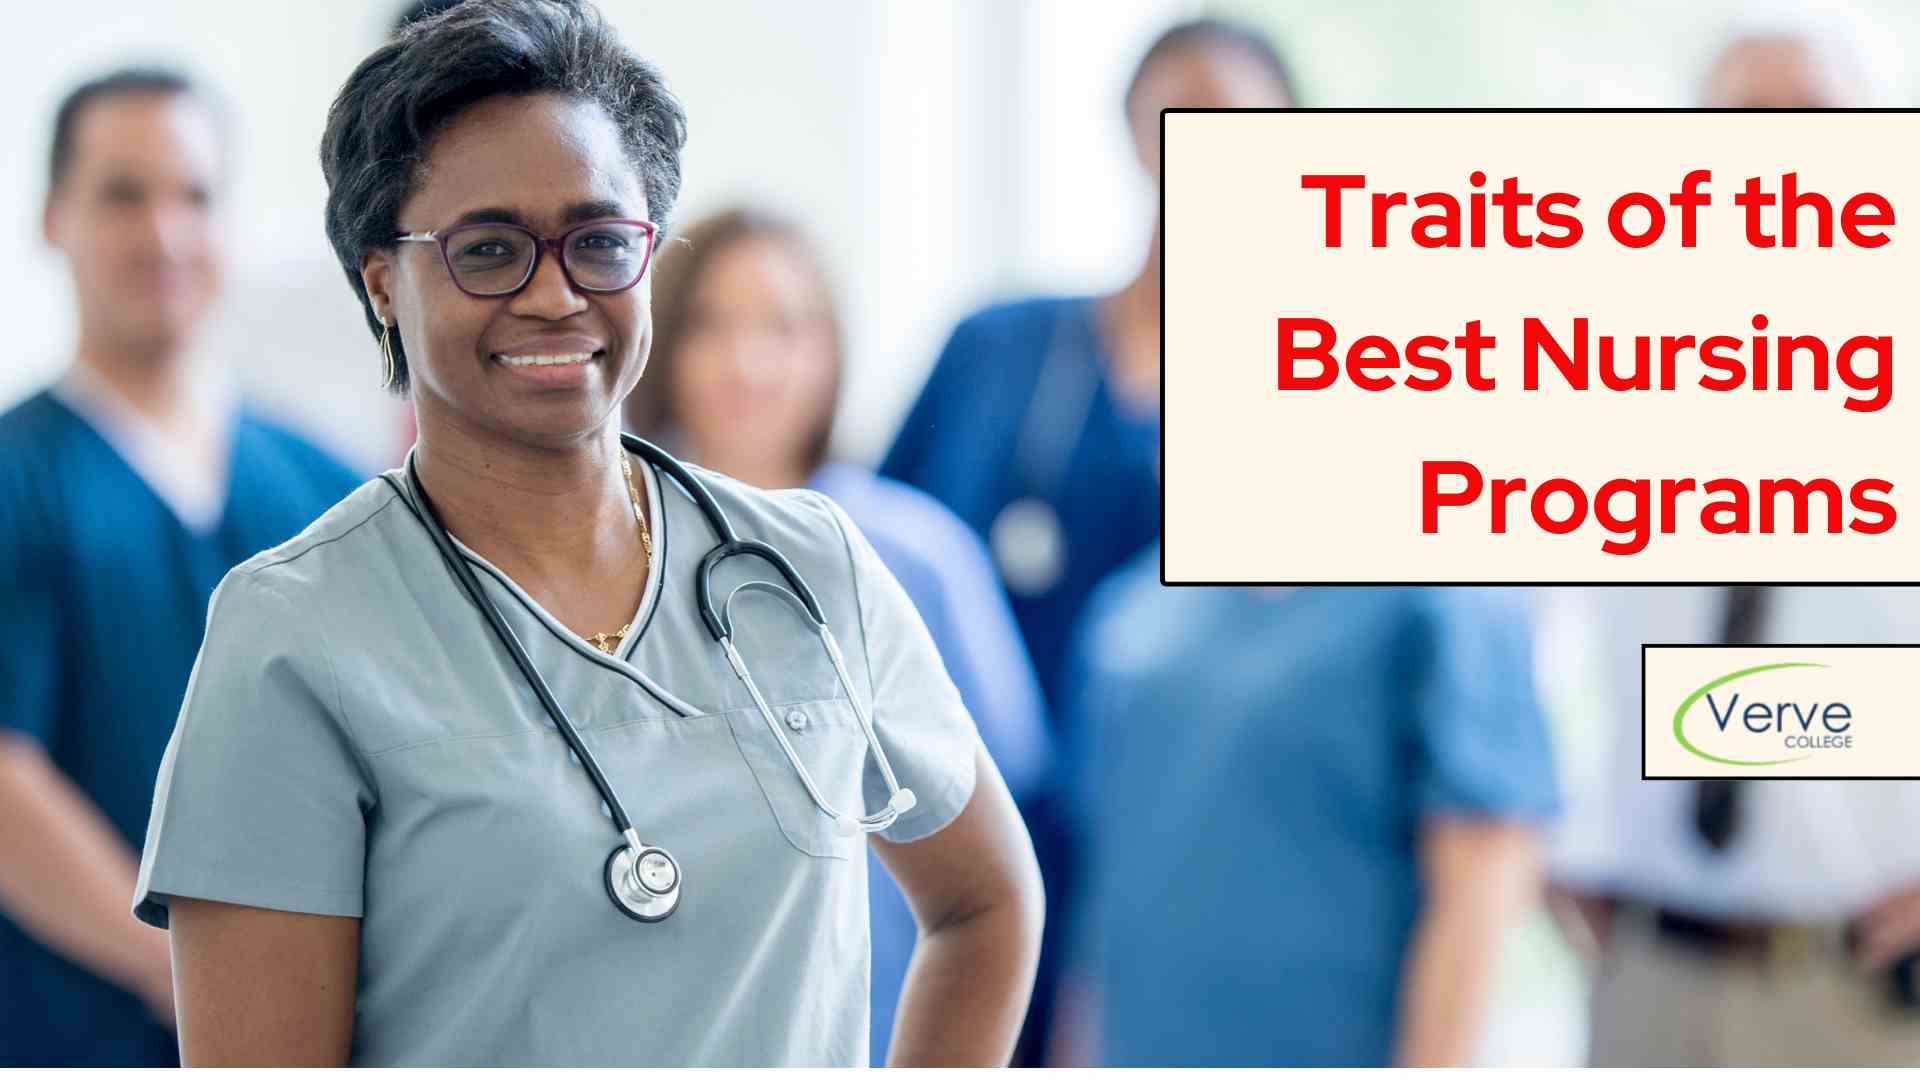 The Best Nursing Programs Have These 7 Traits